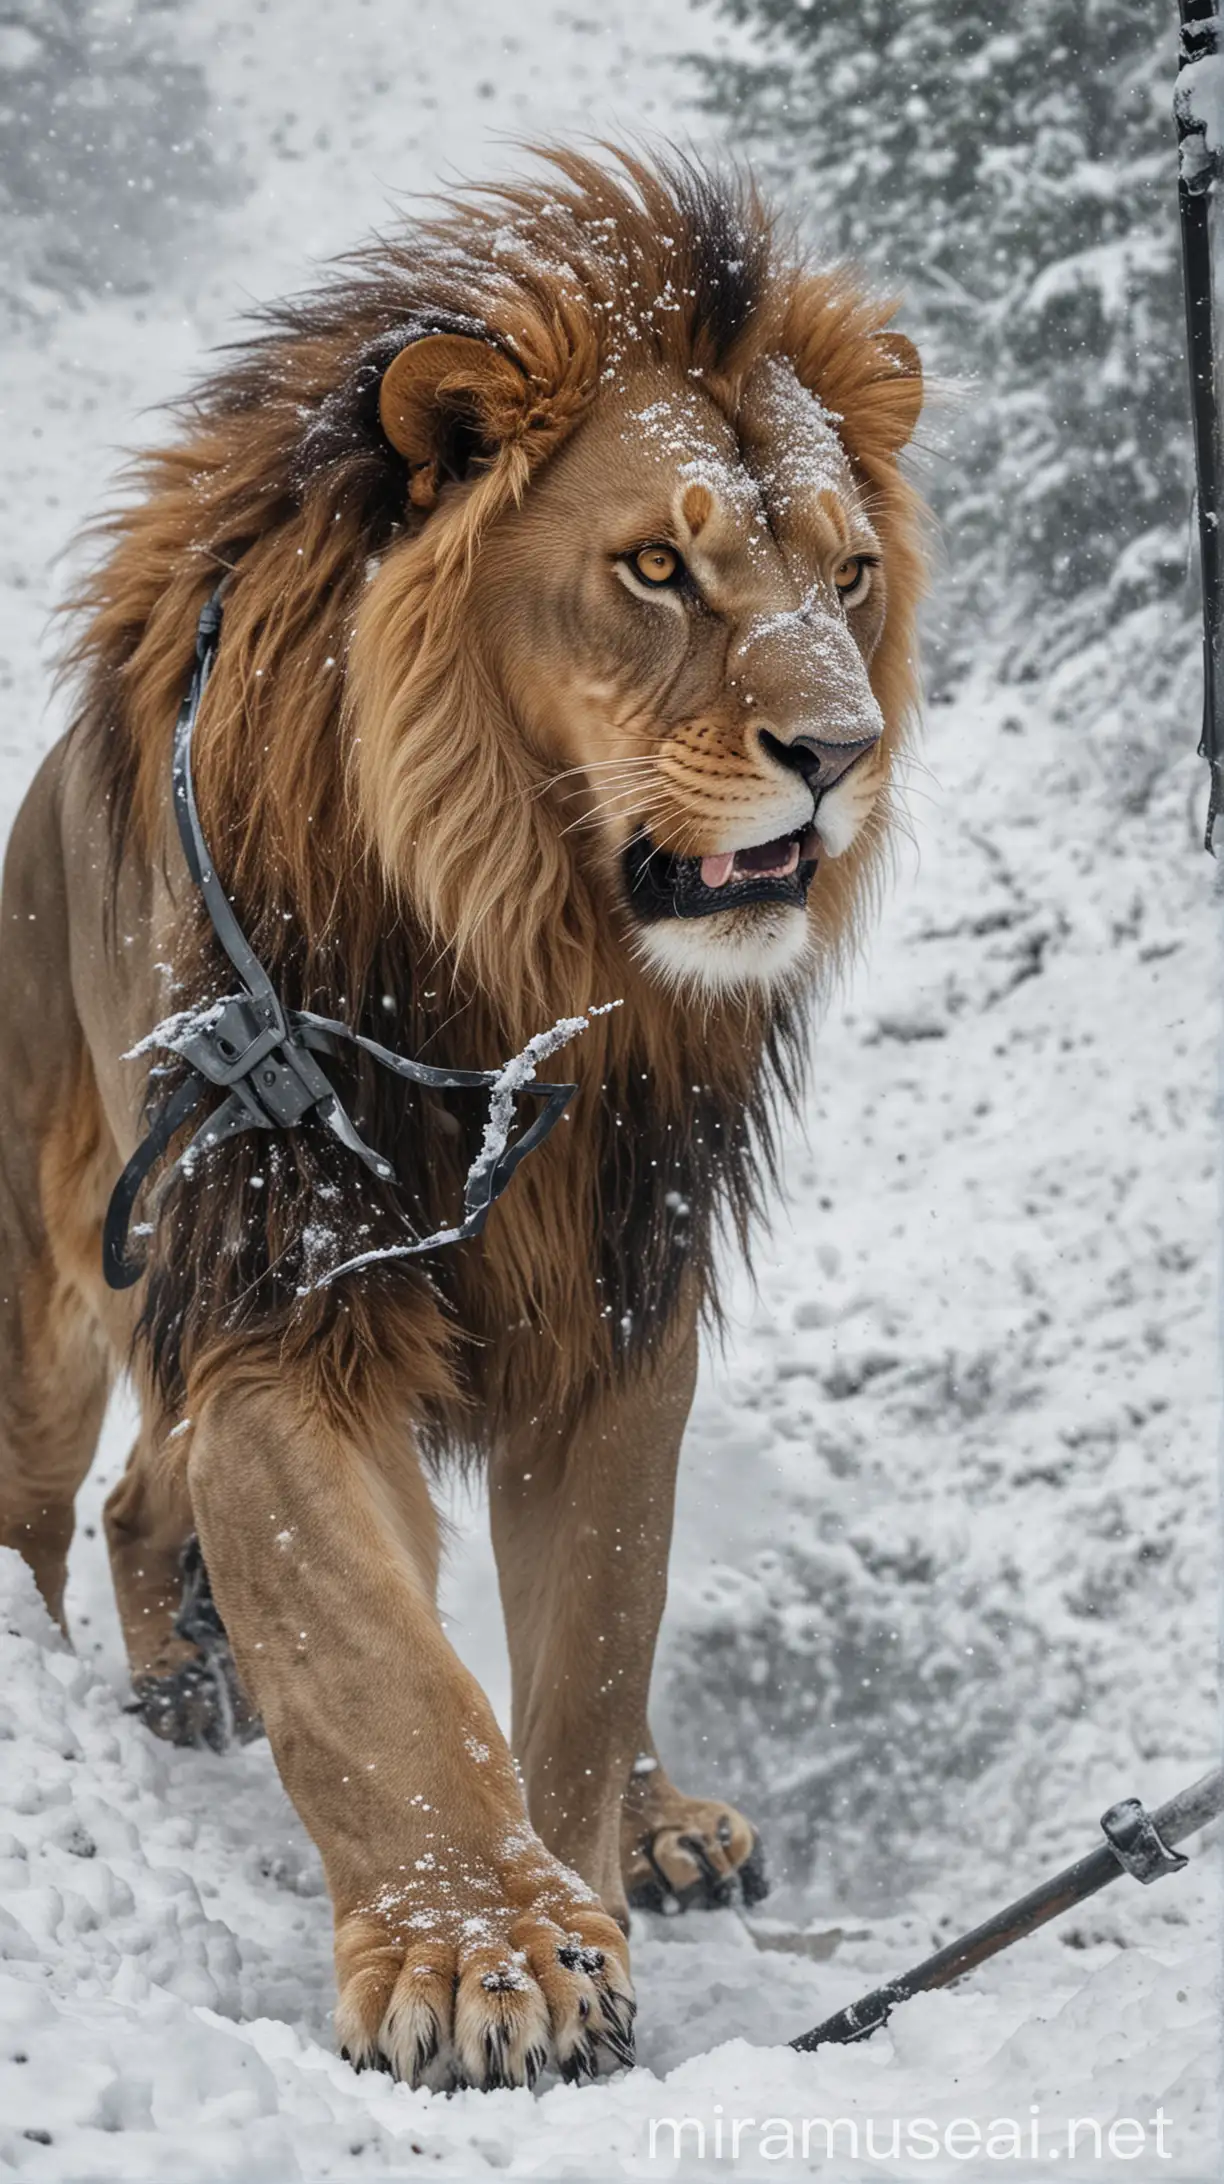 Prompt: Generate an image portraying a solder fight a fierce lion in the snowy pit.